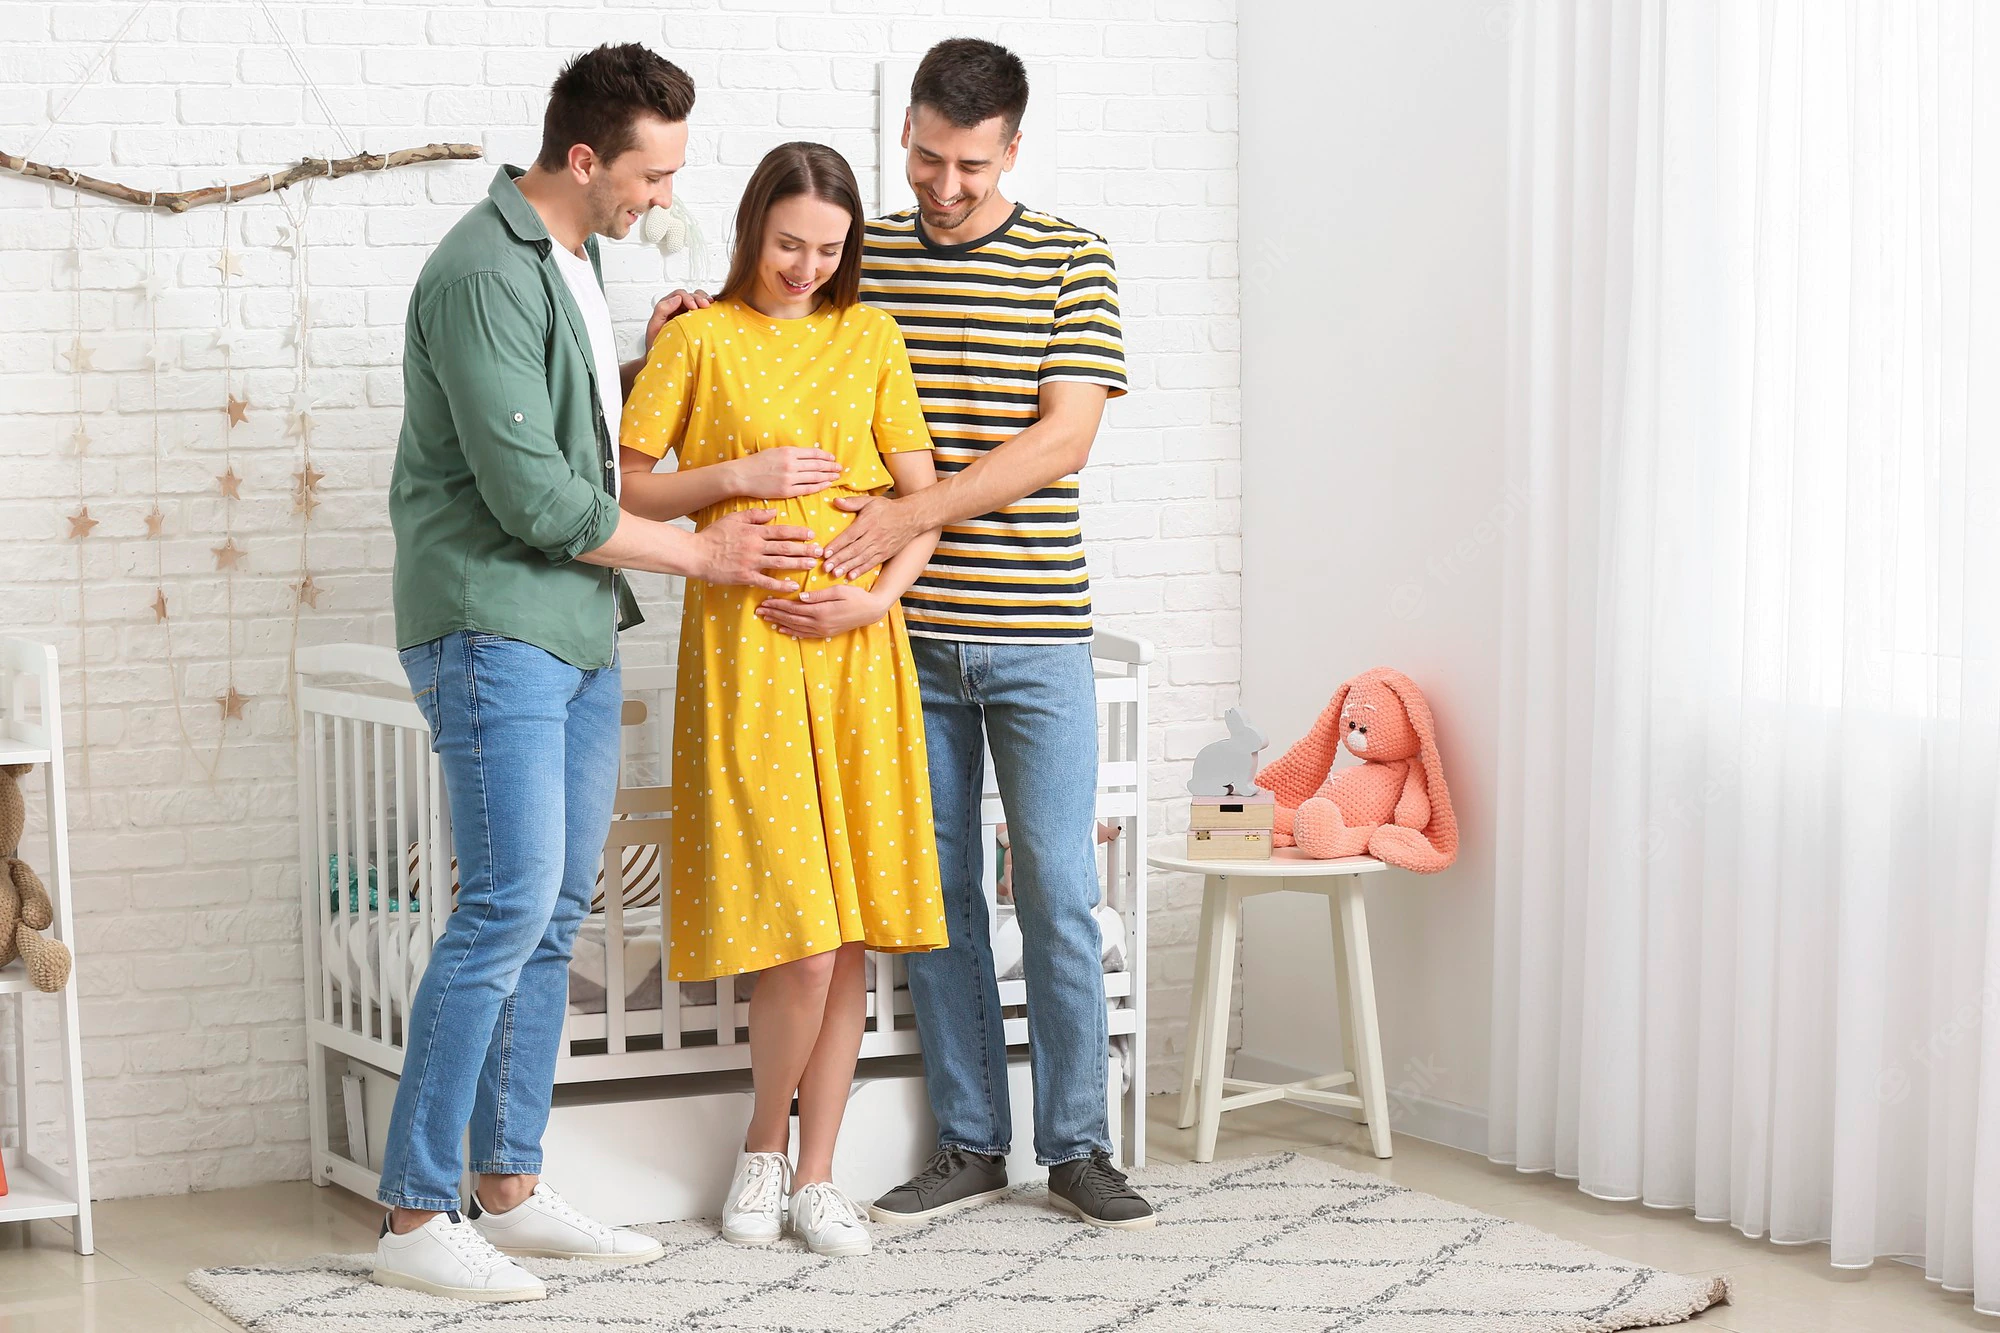 Surrogacy for gay couples